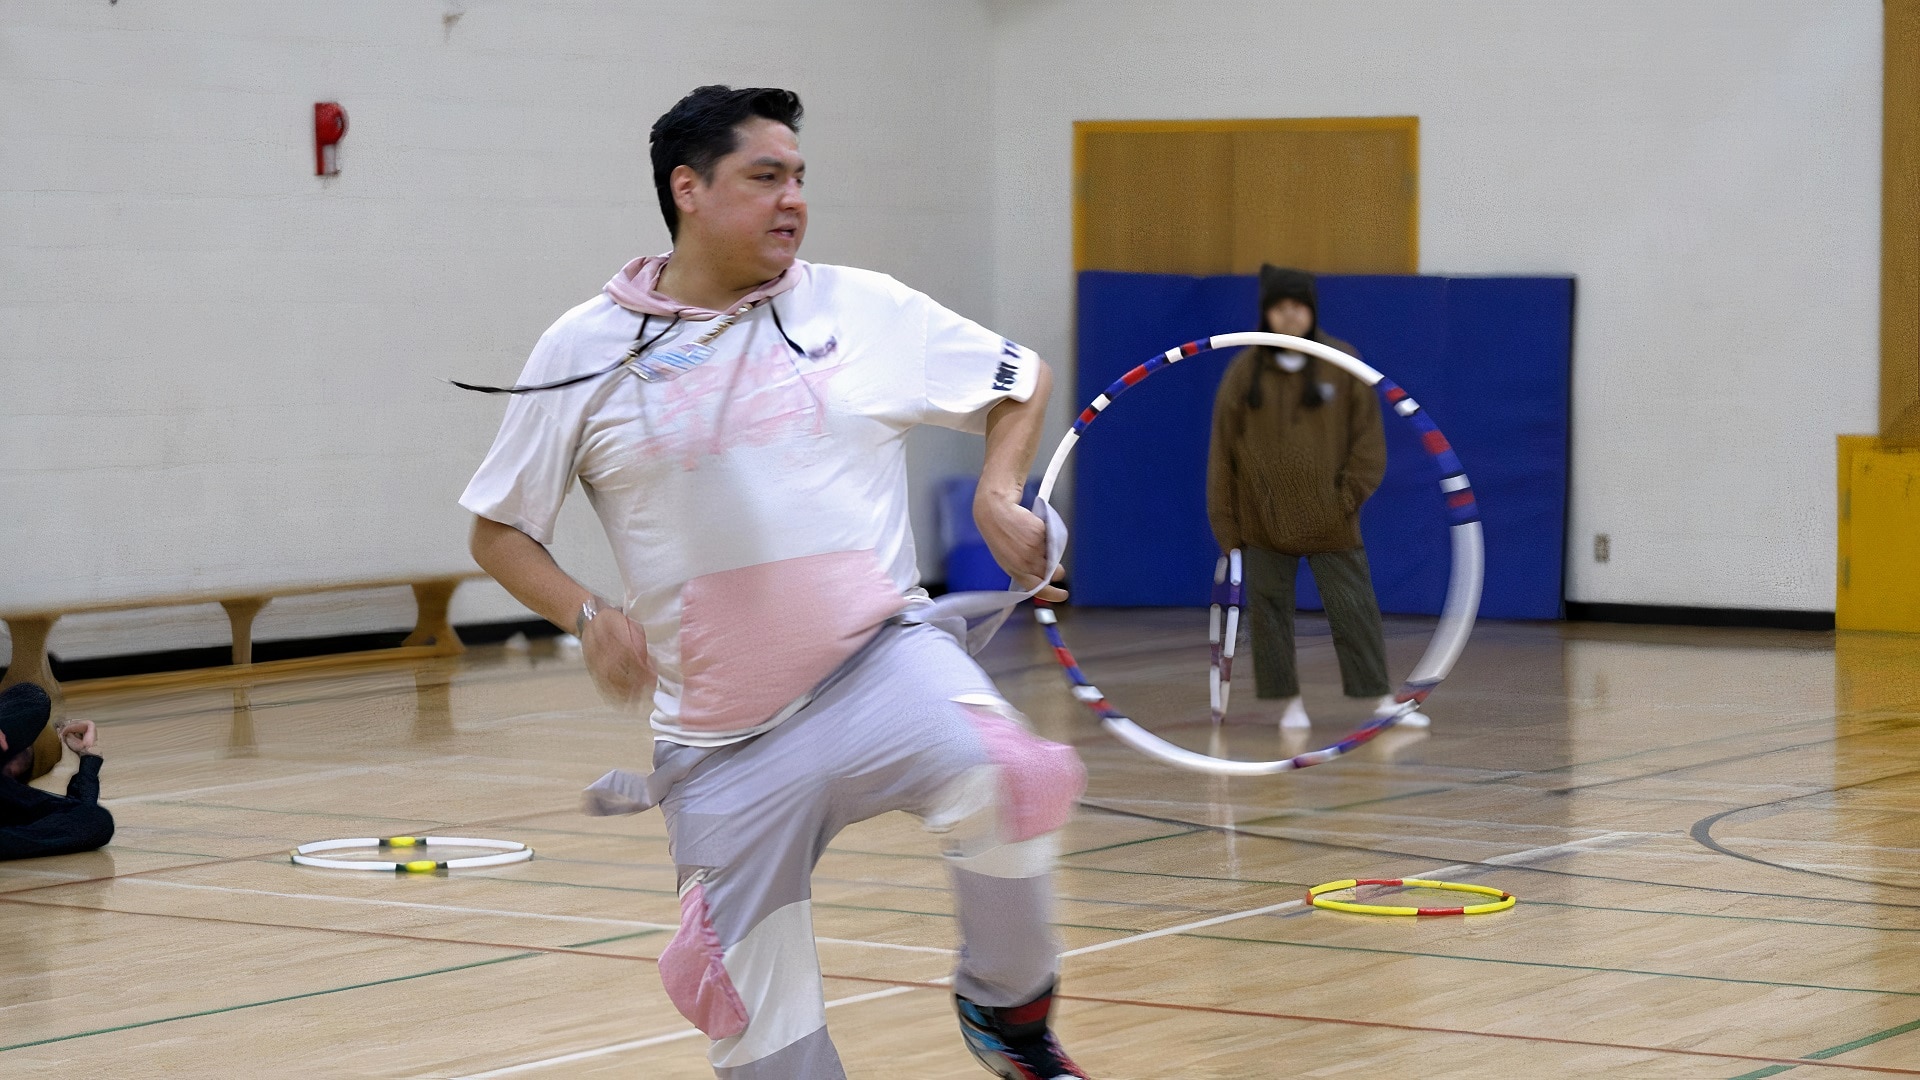 Hoop dancing classes offer Indigenous youth exercise, connection [Video]